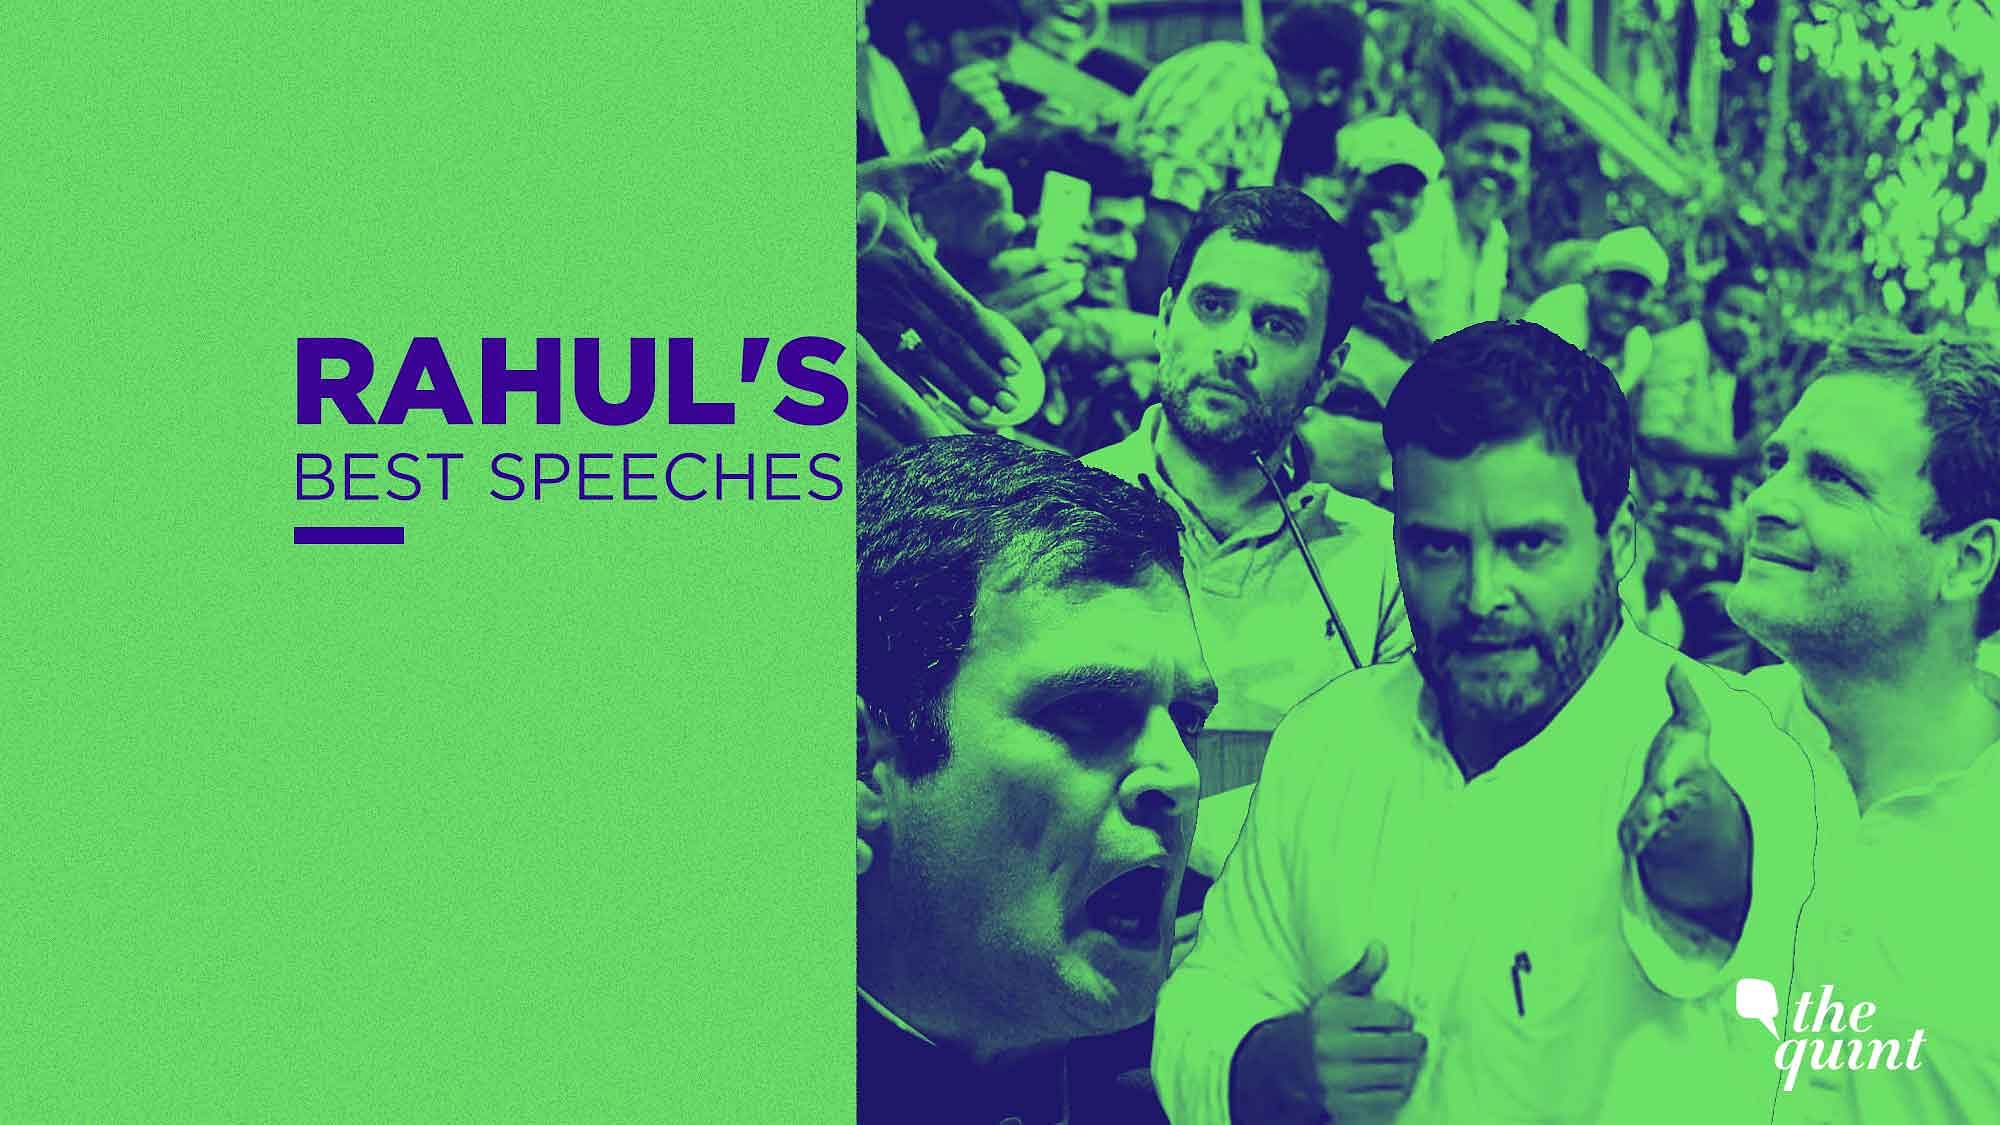 Rahul Gandhi’s one liners, puns, and sarcasm intended to the BJP instantly became social media hits.